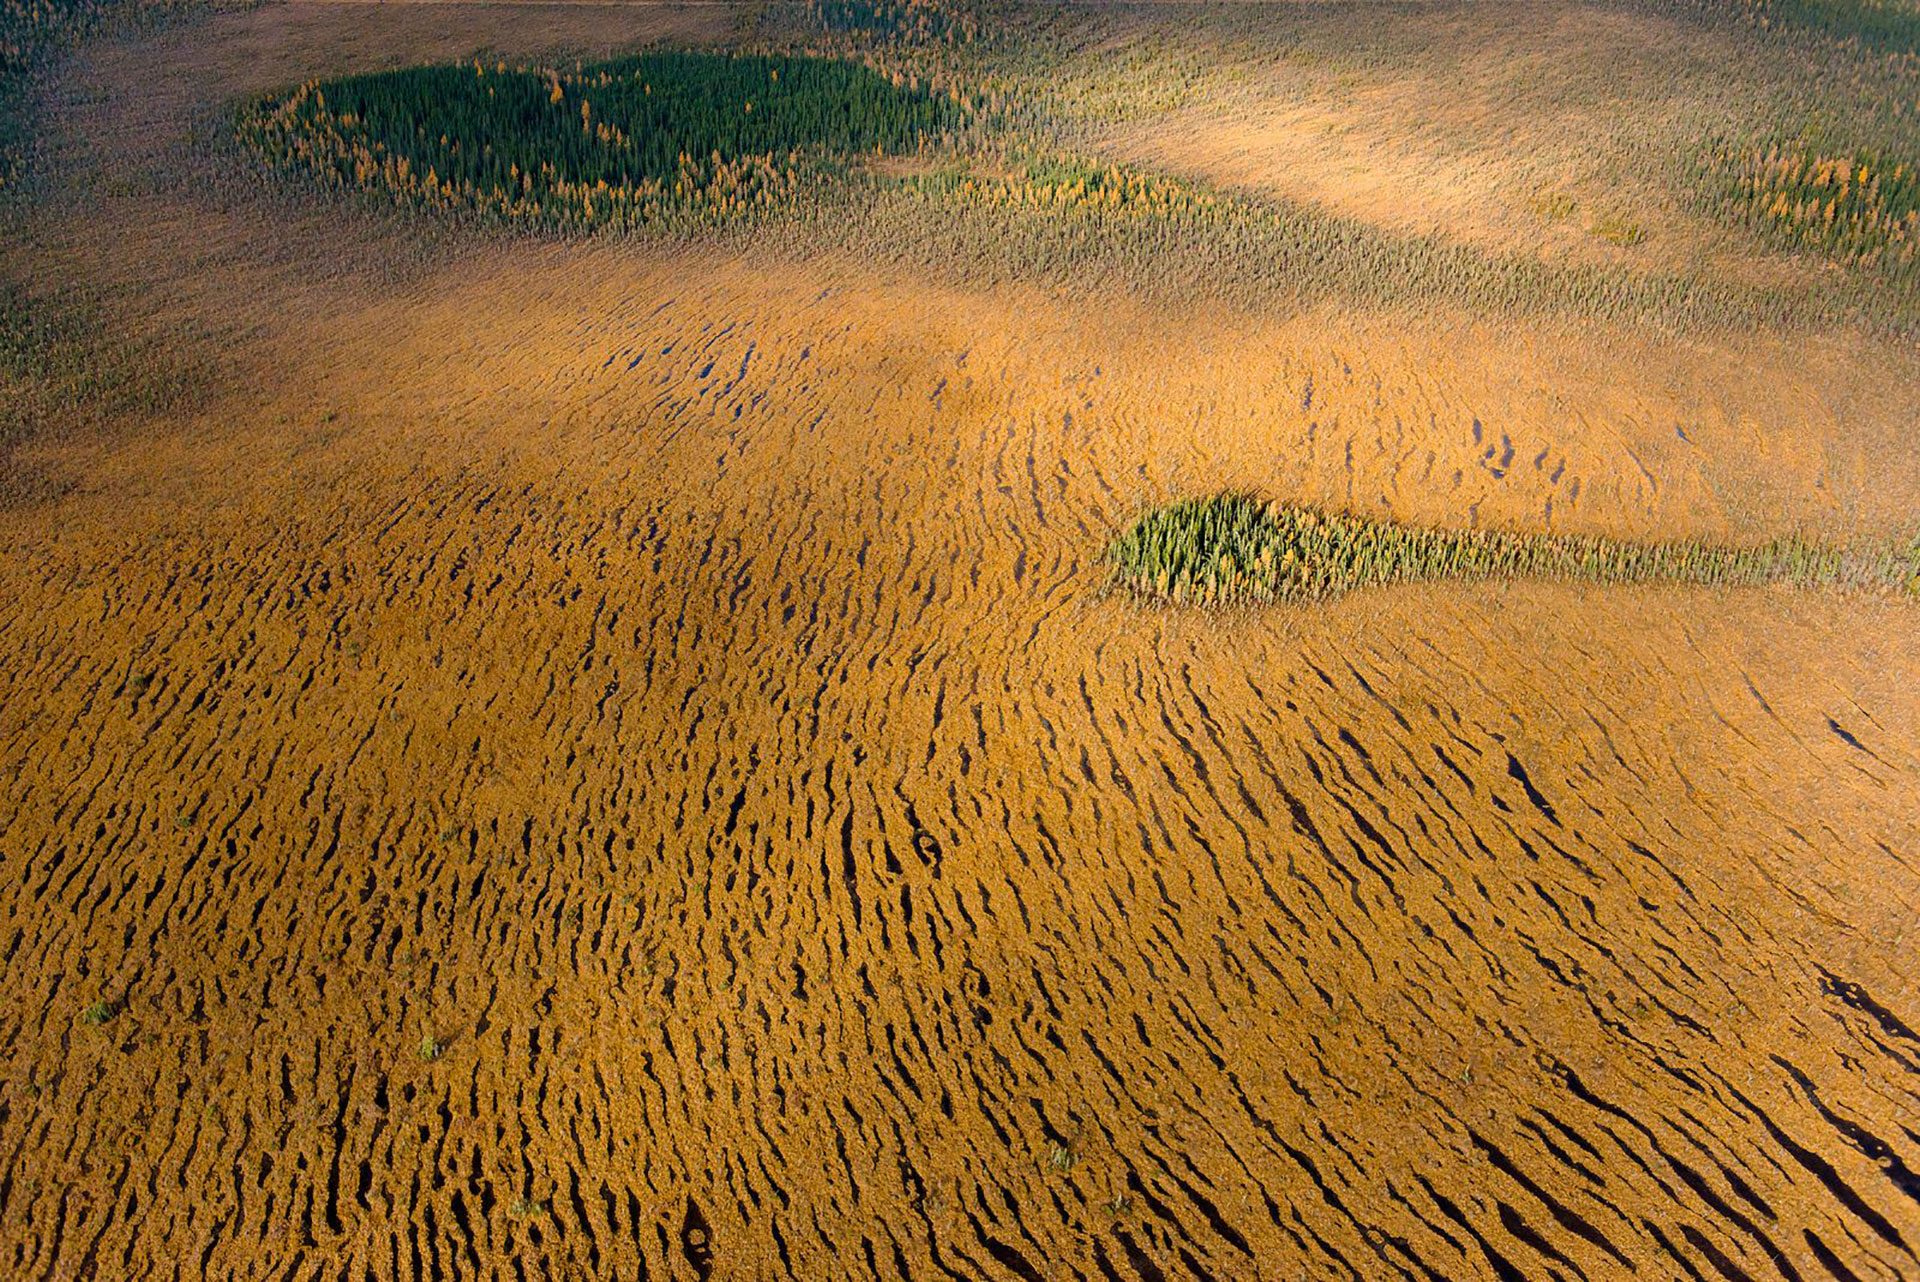 An aerial view of globally-significant peatlands in northern Ontario, where the Mushkegowuk Council are advancing efforts to protect terrestrial and marine ecosystems in their homelands. Photo: Garth Lenz